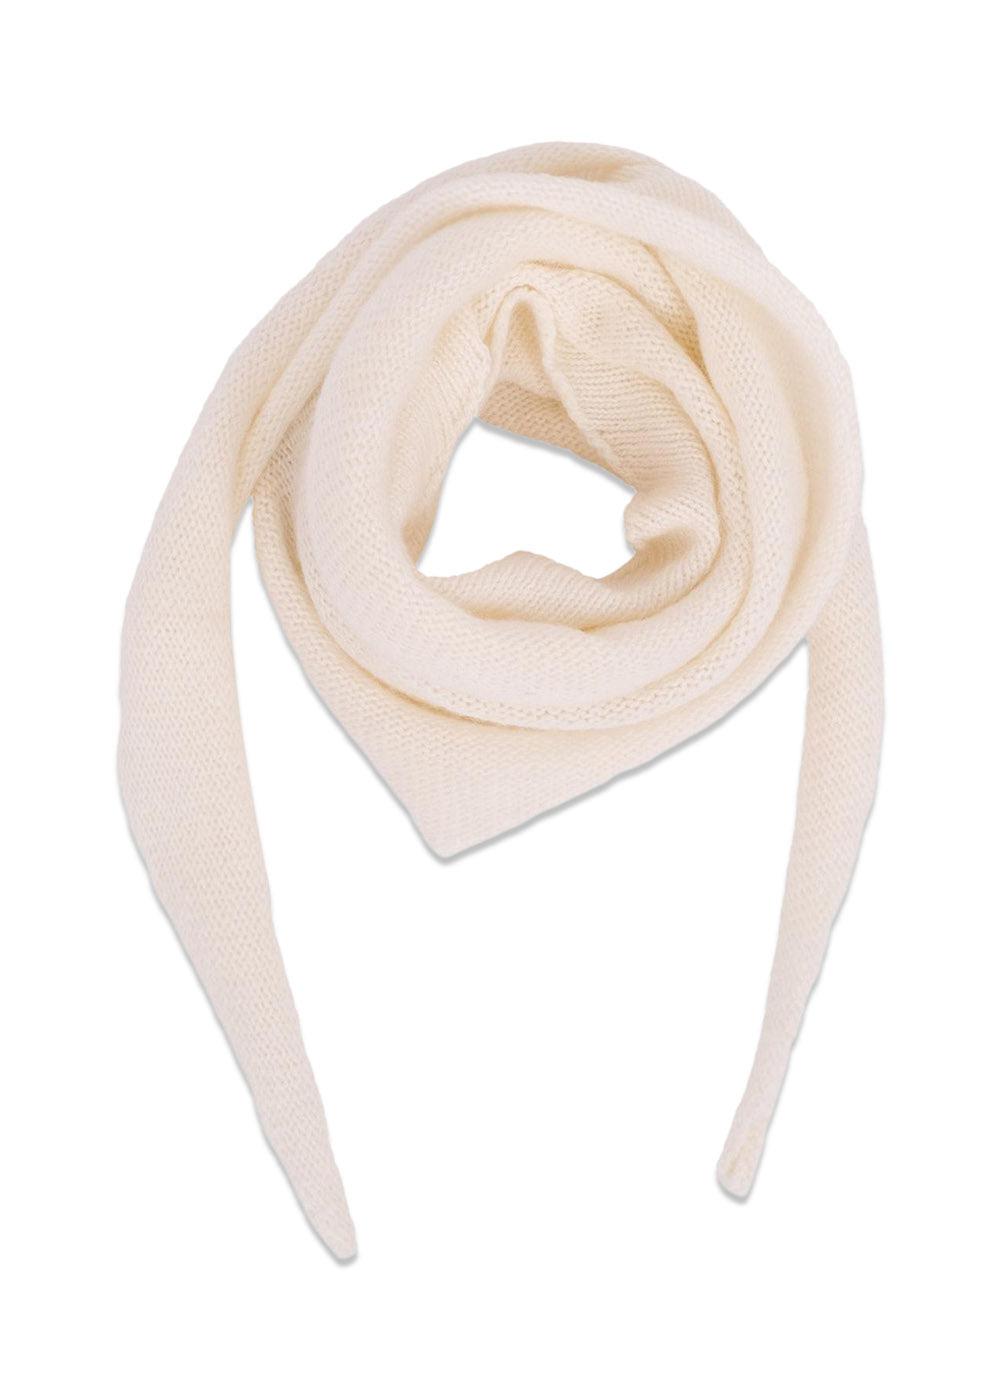 Neo Noirs Misty Knit Scarf - Off White. Køb accessories her.